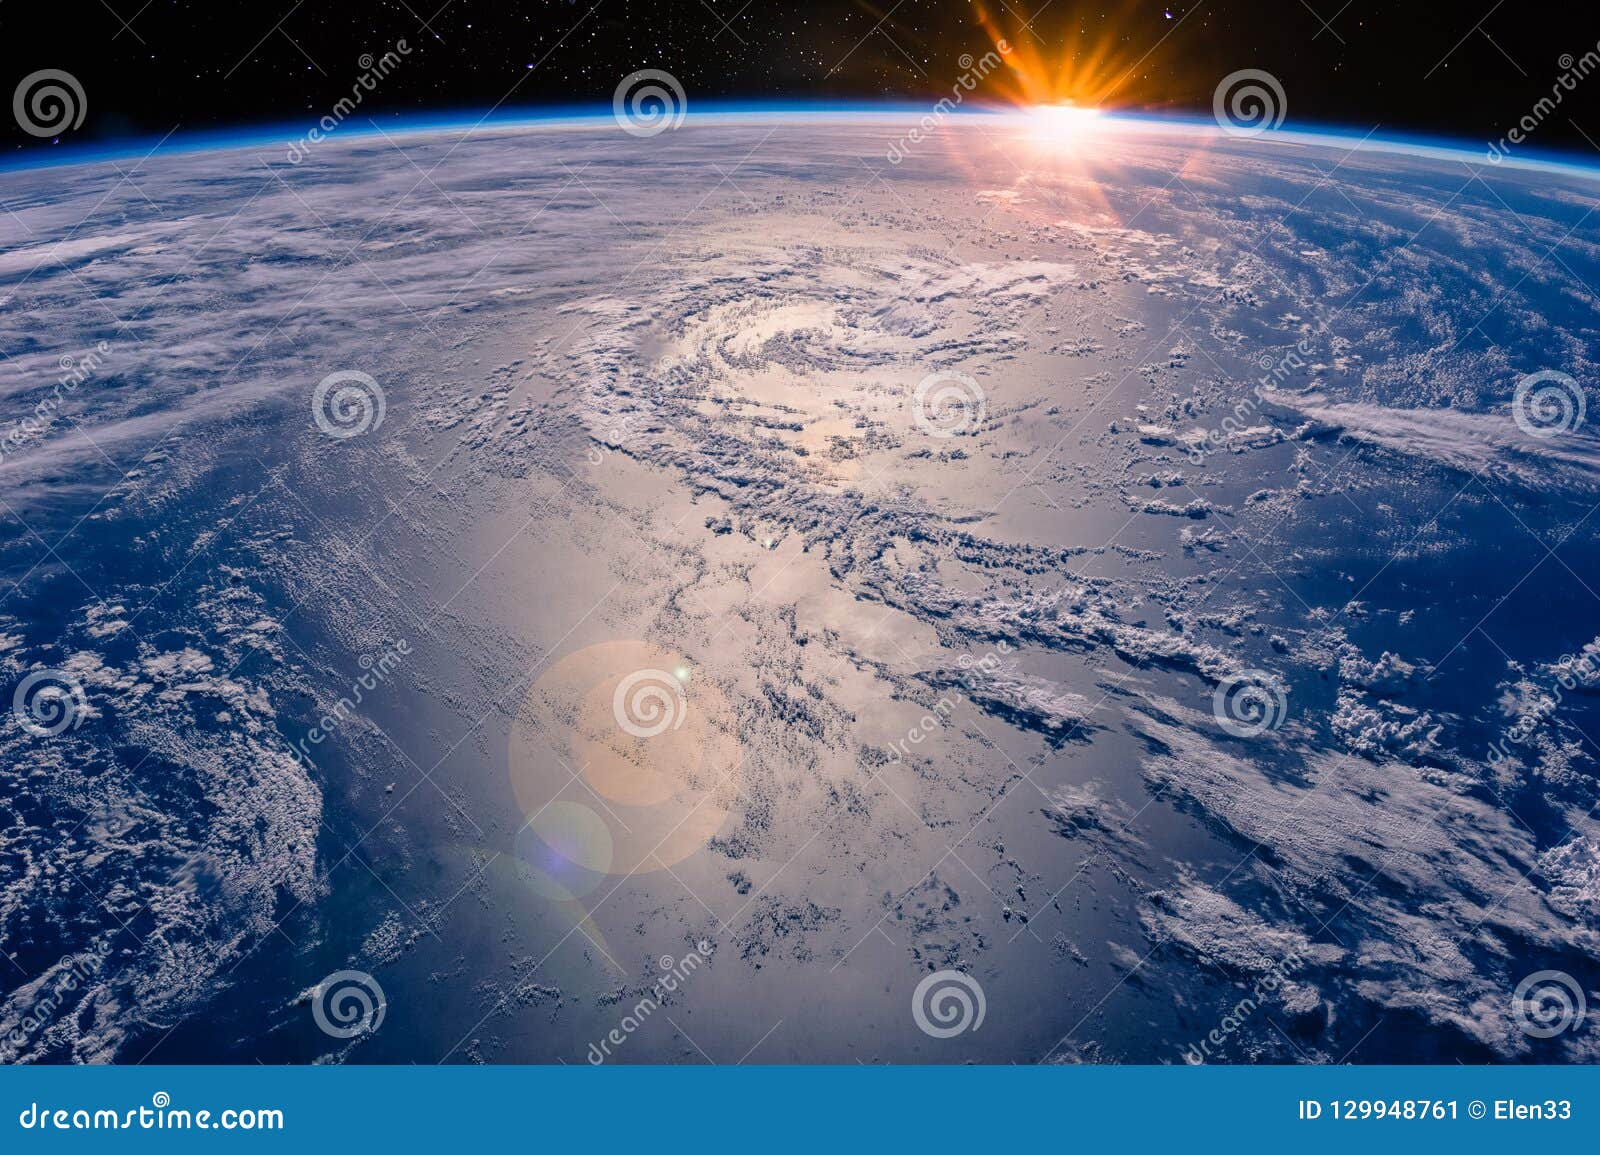 high altitude view of the earth in space.